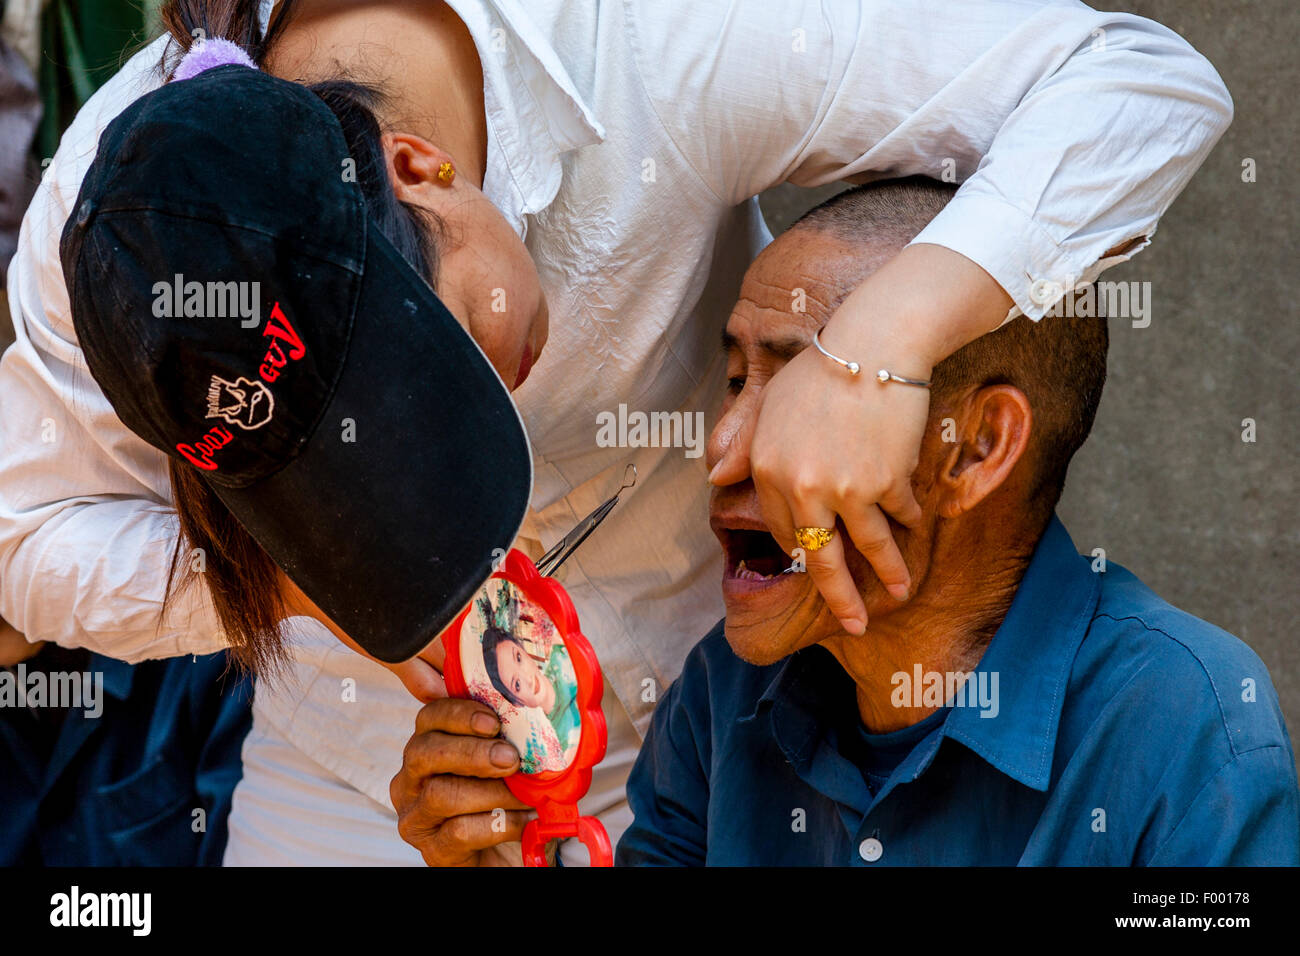 A Street Dentist Examines The Teeth Of An Elderly Man, Xingping Town near Guilin, Guangxi Province, China Stock Photo